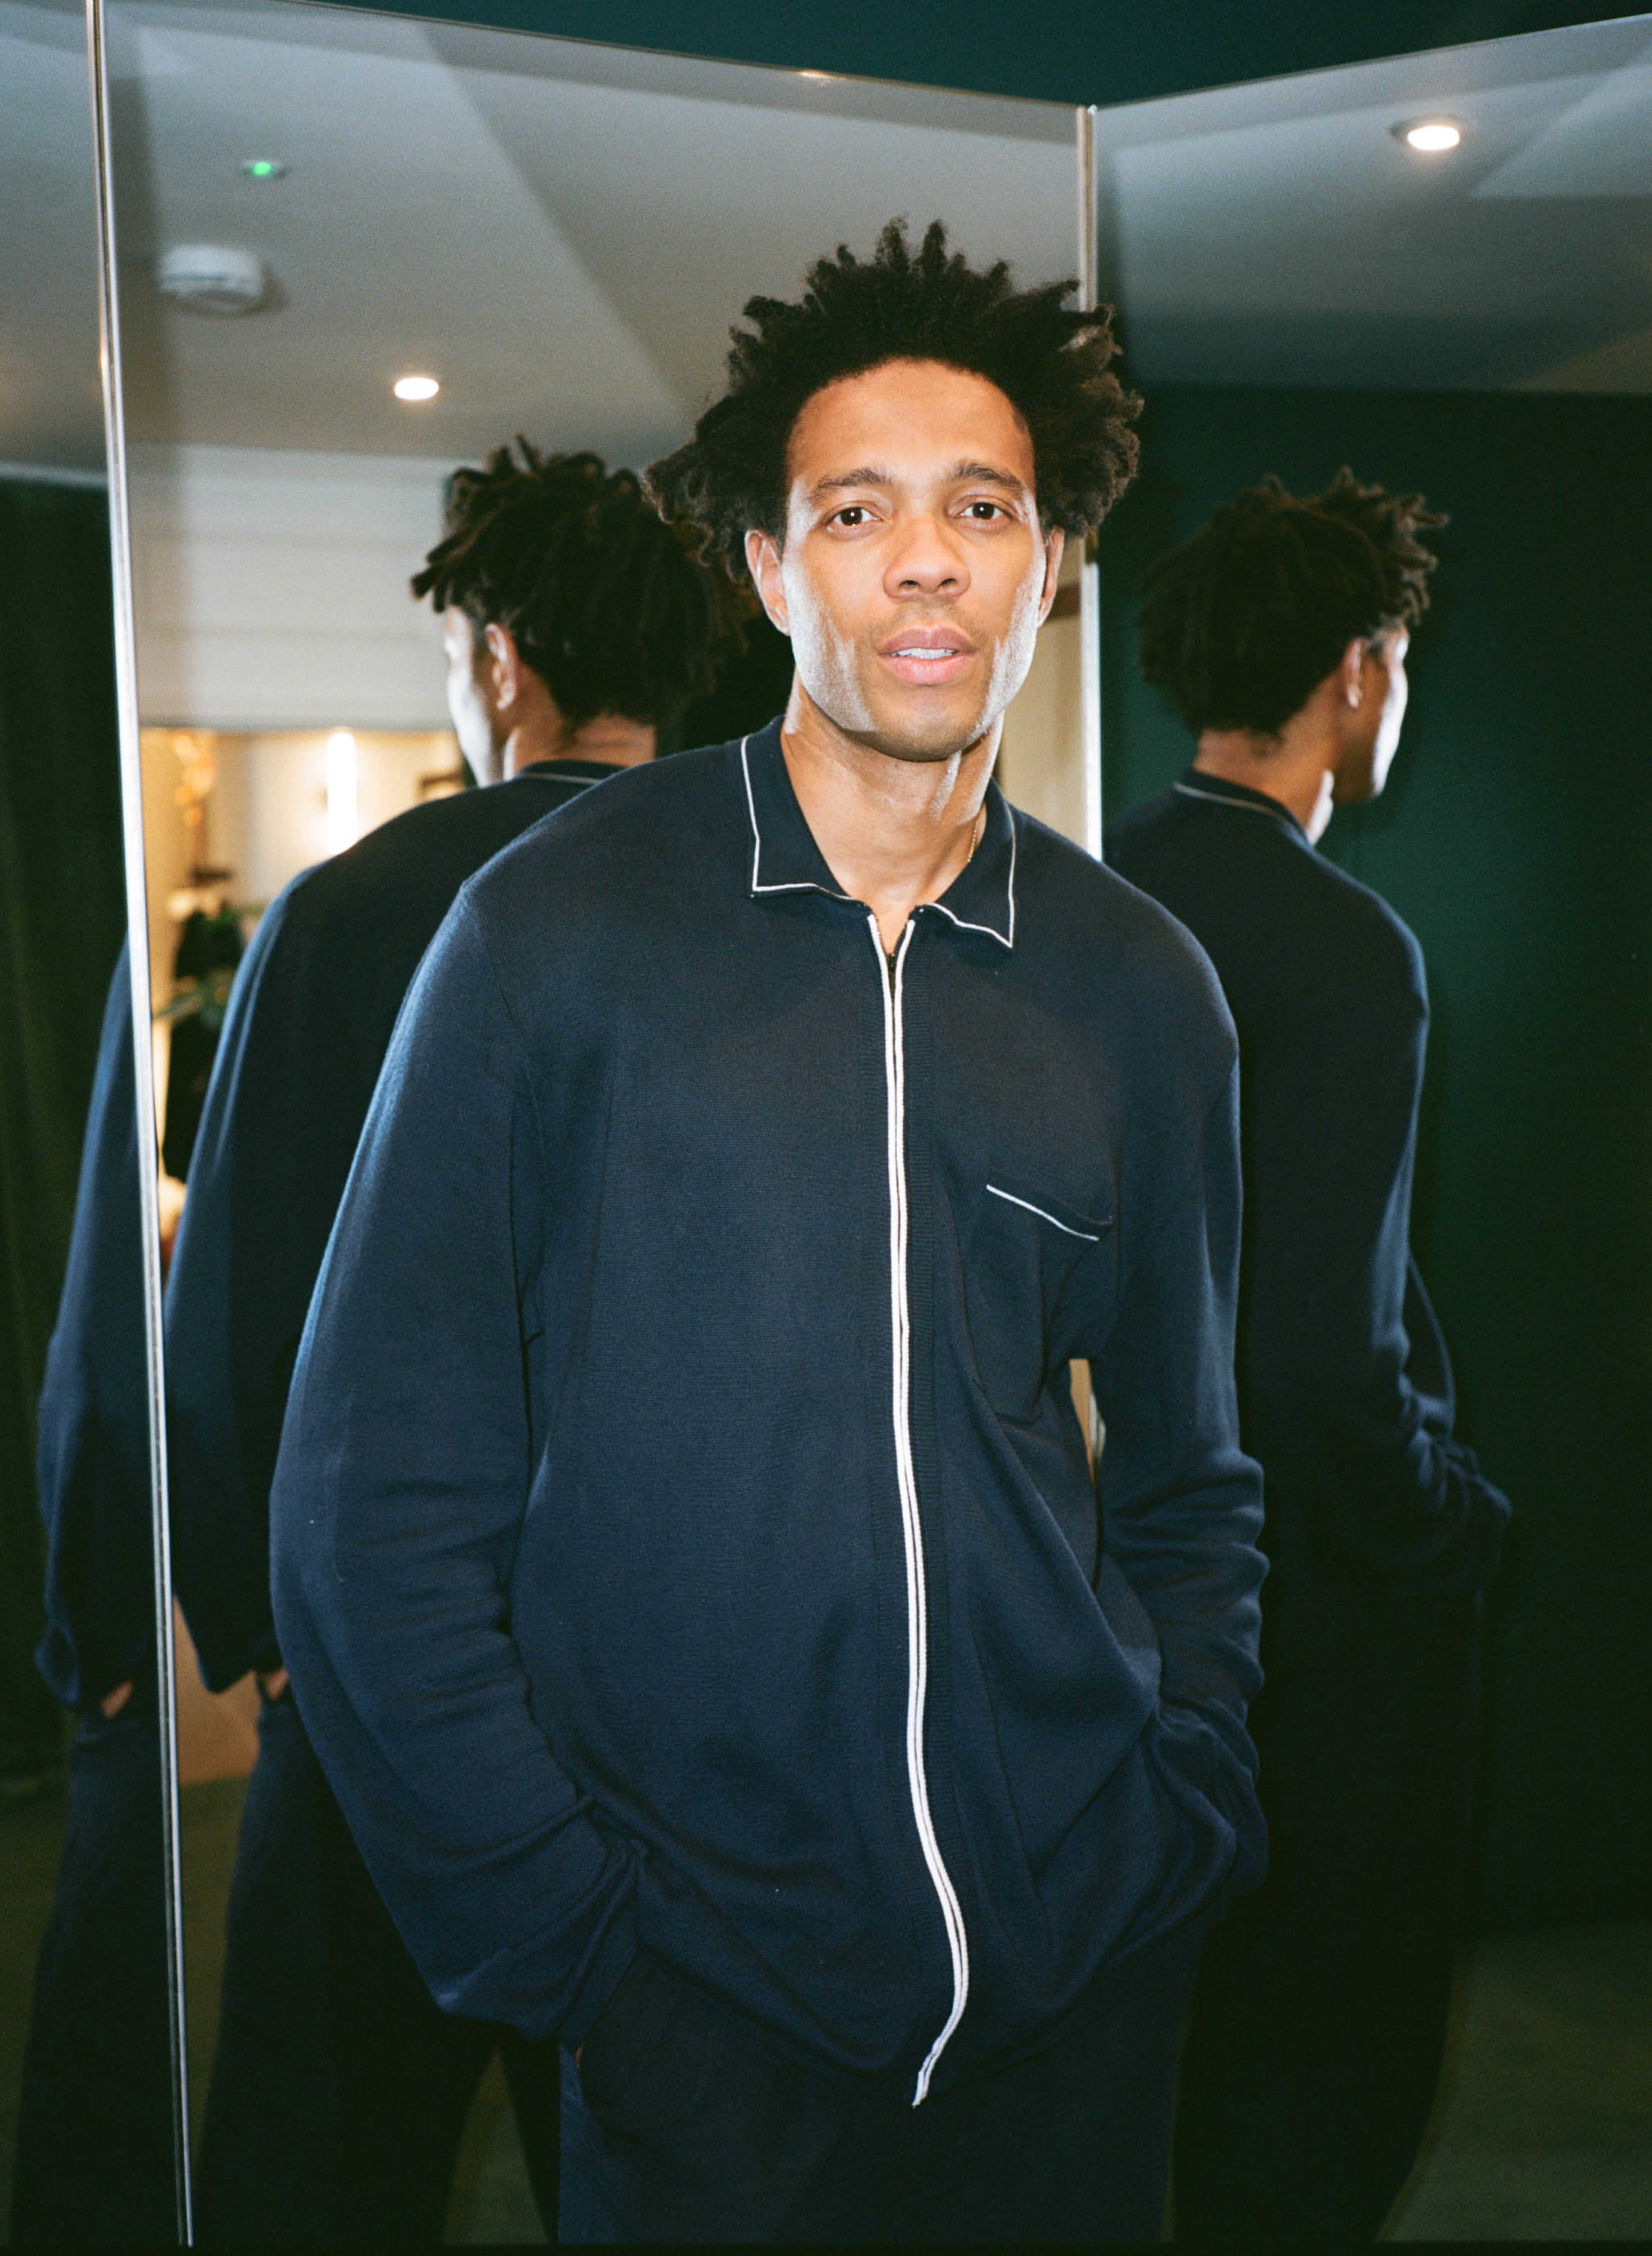 Charlie Casely-Hayford portrait by Louis AW Sheridan | Mr & Mrs Smith